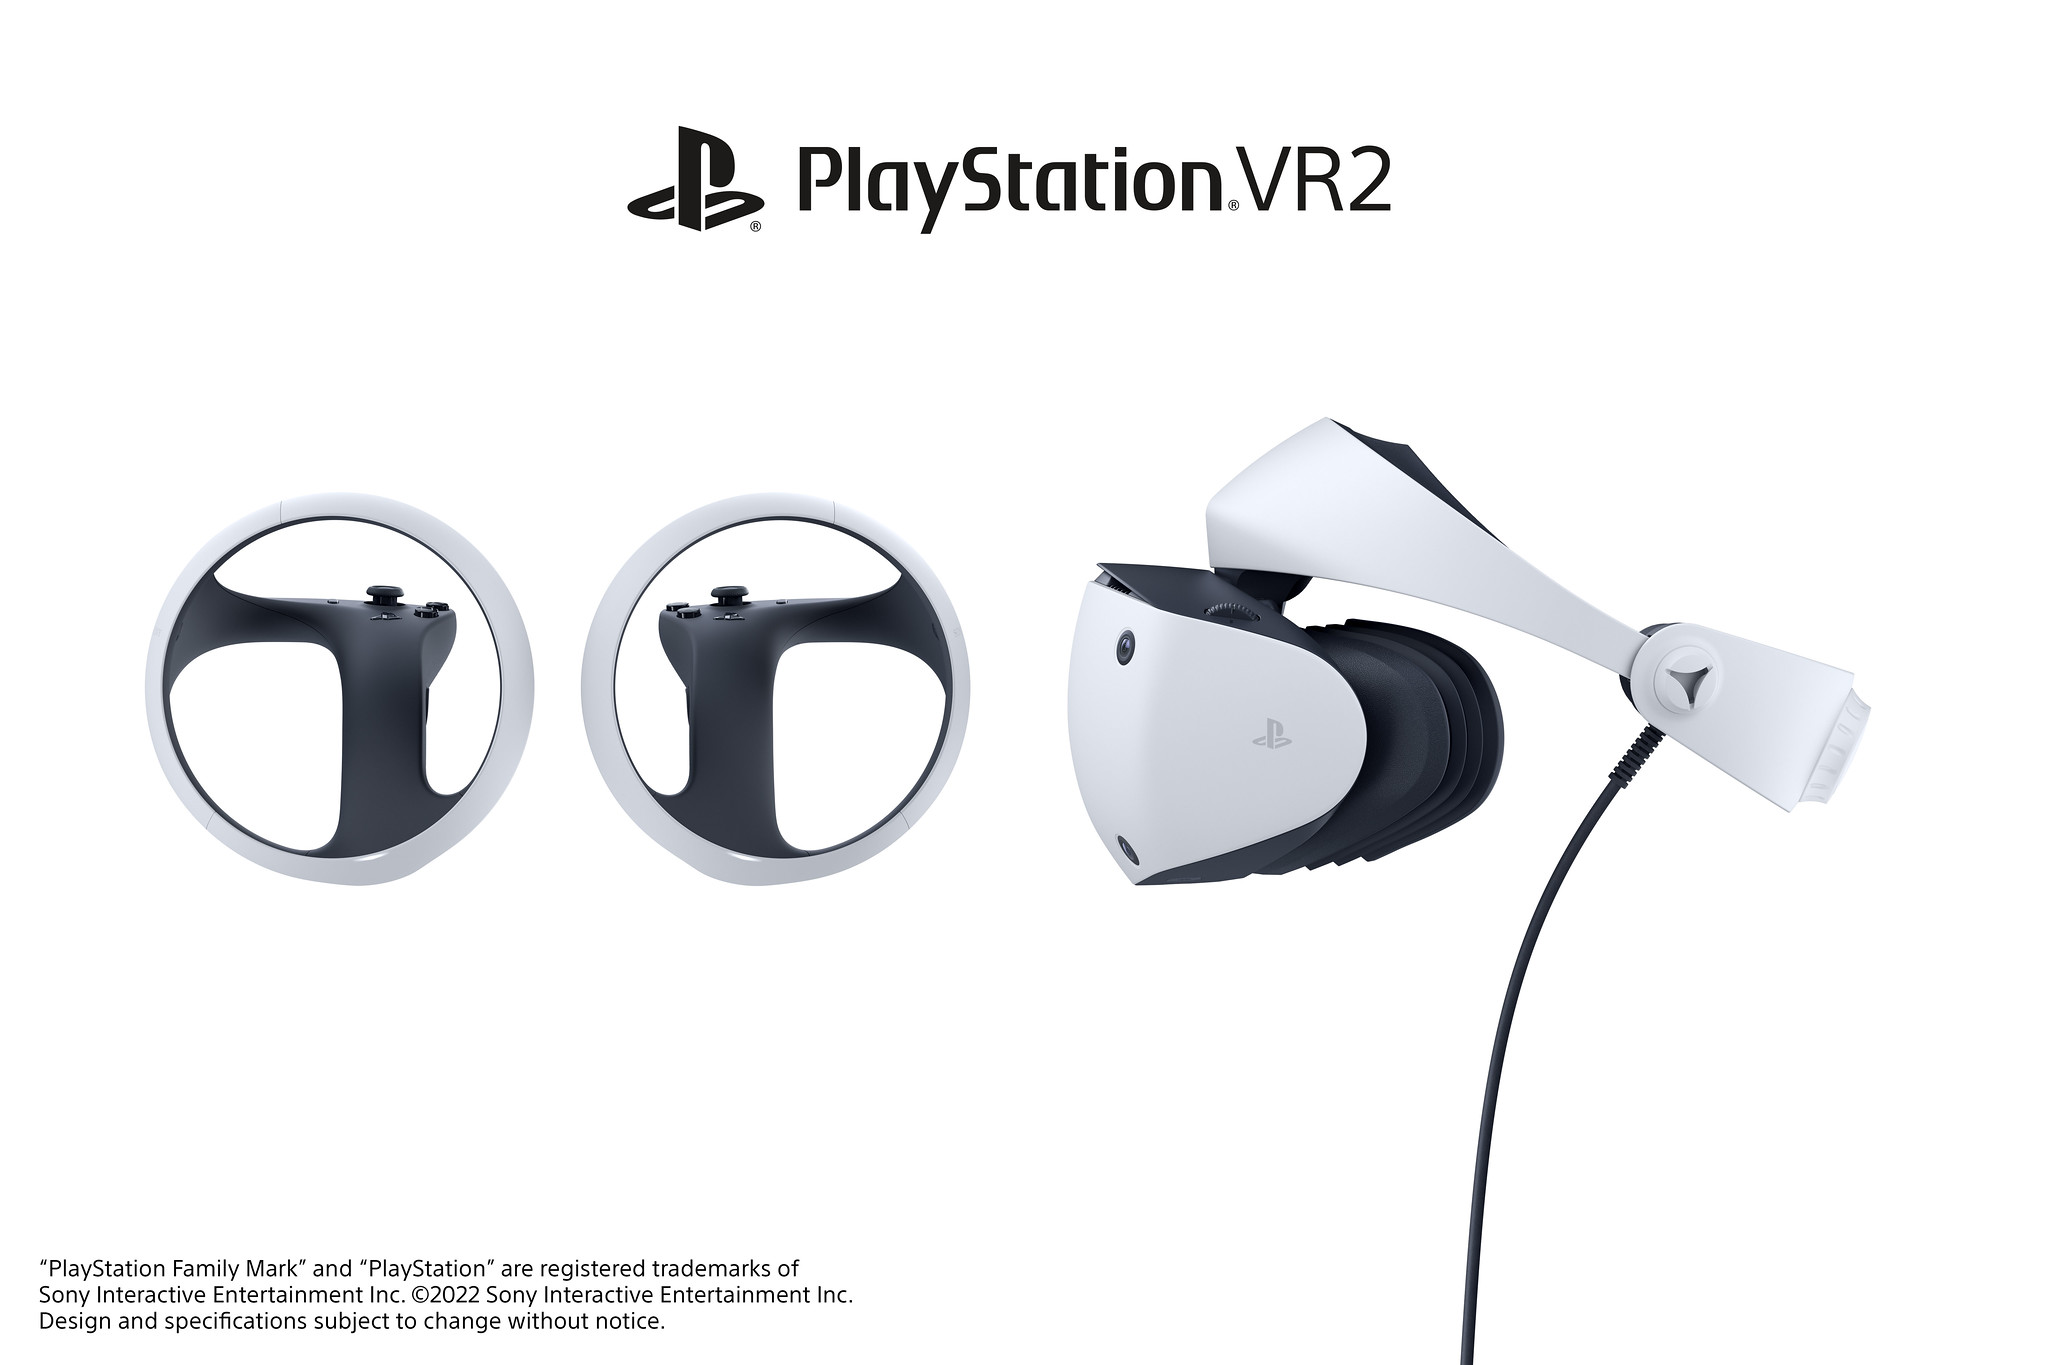 Gran Turismo 7 Confirmed as PlayStation VR2 Launch Day Title – GTPlanet